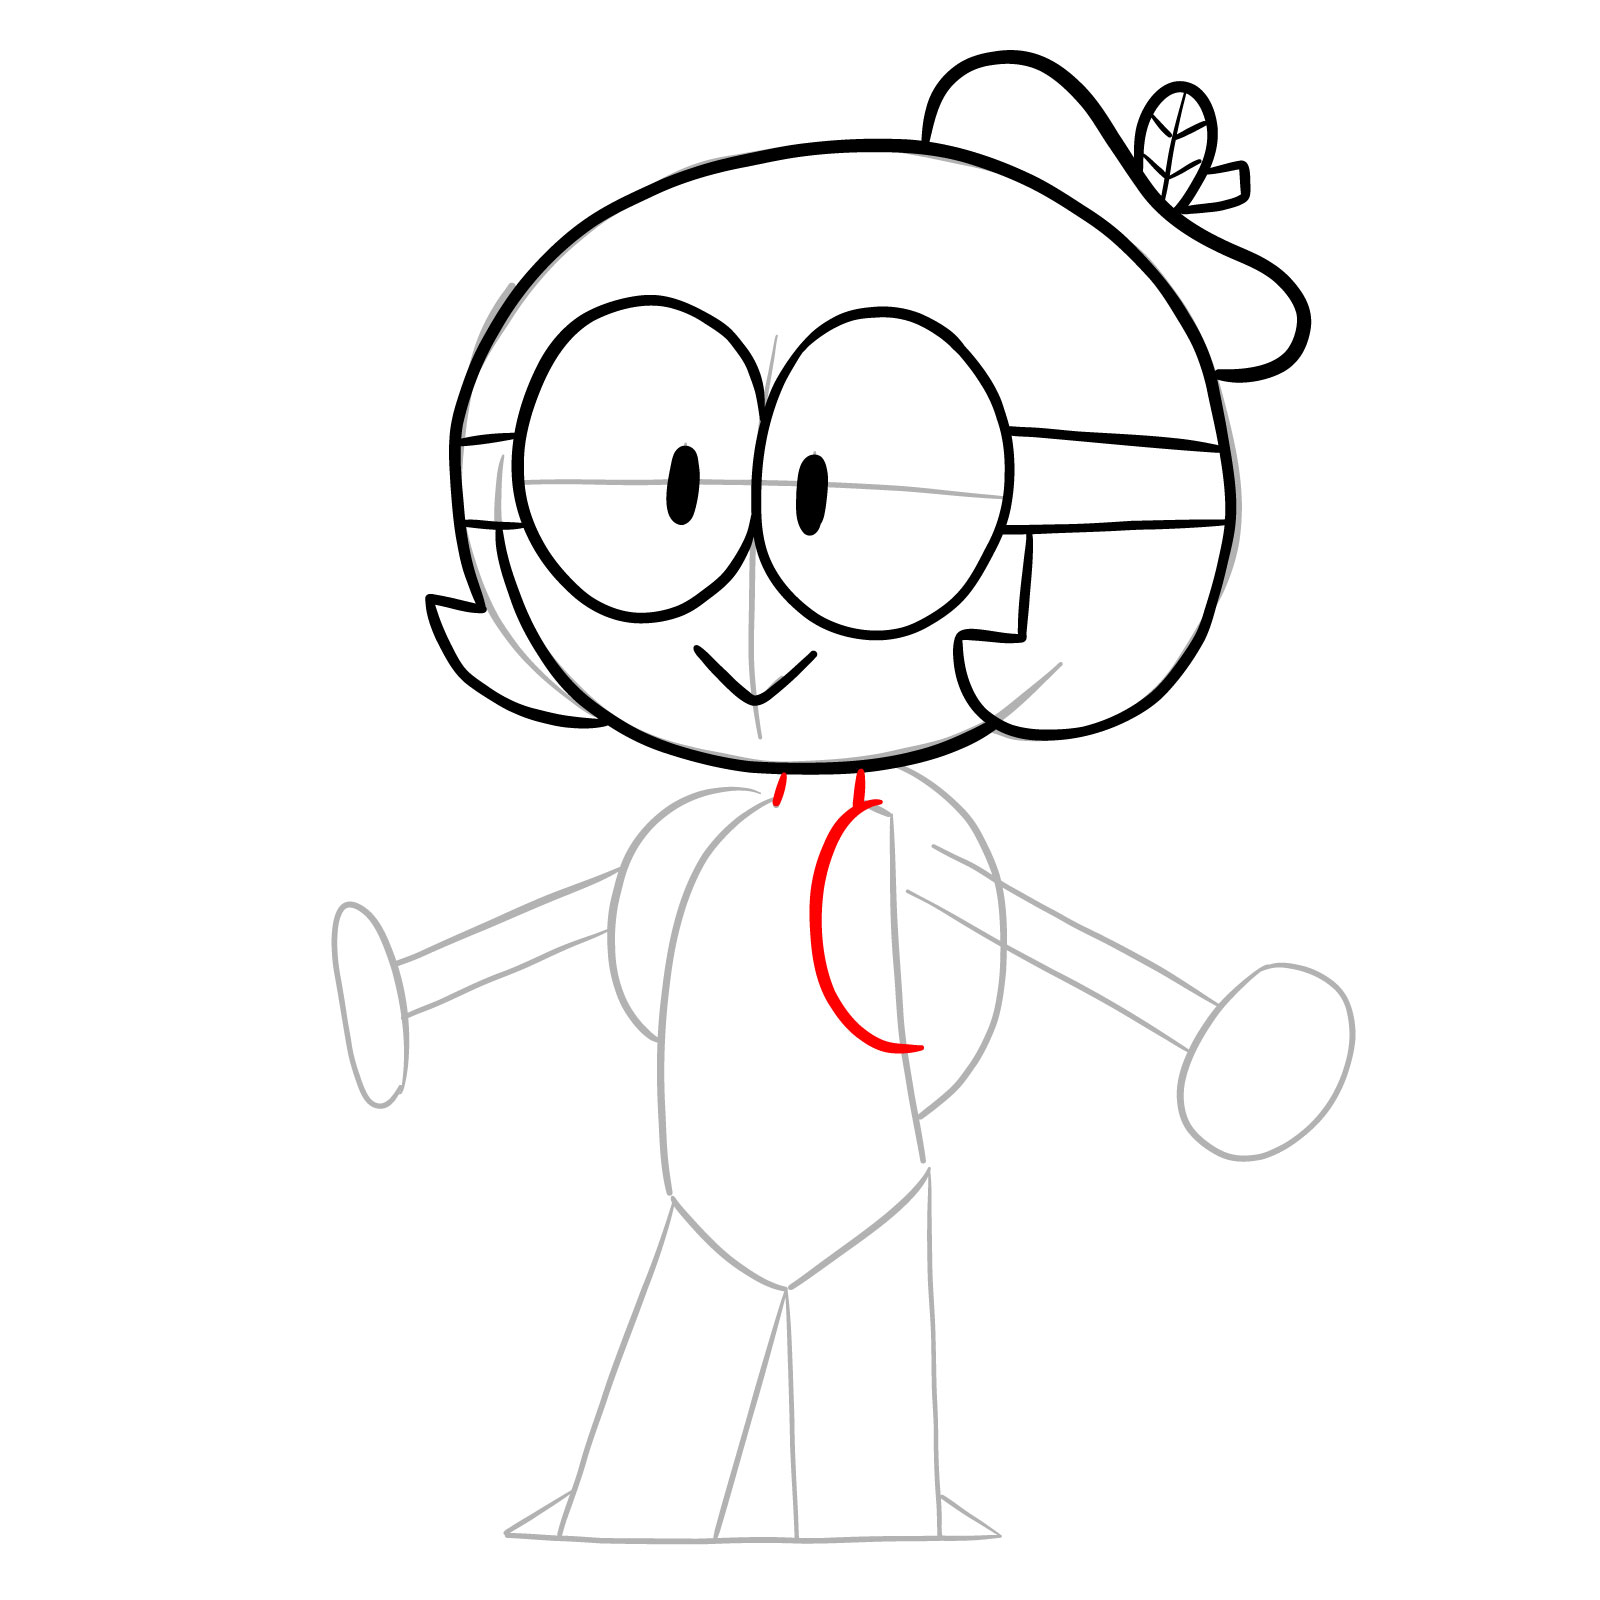 How to draw Dendy from OK K.O.! - step 11